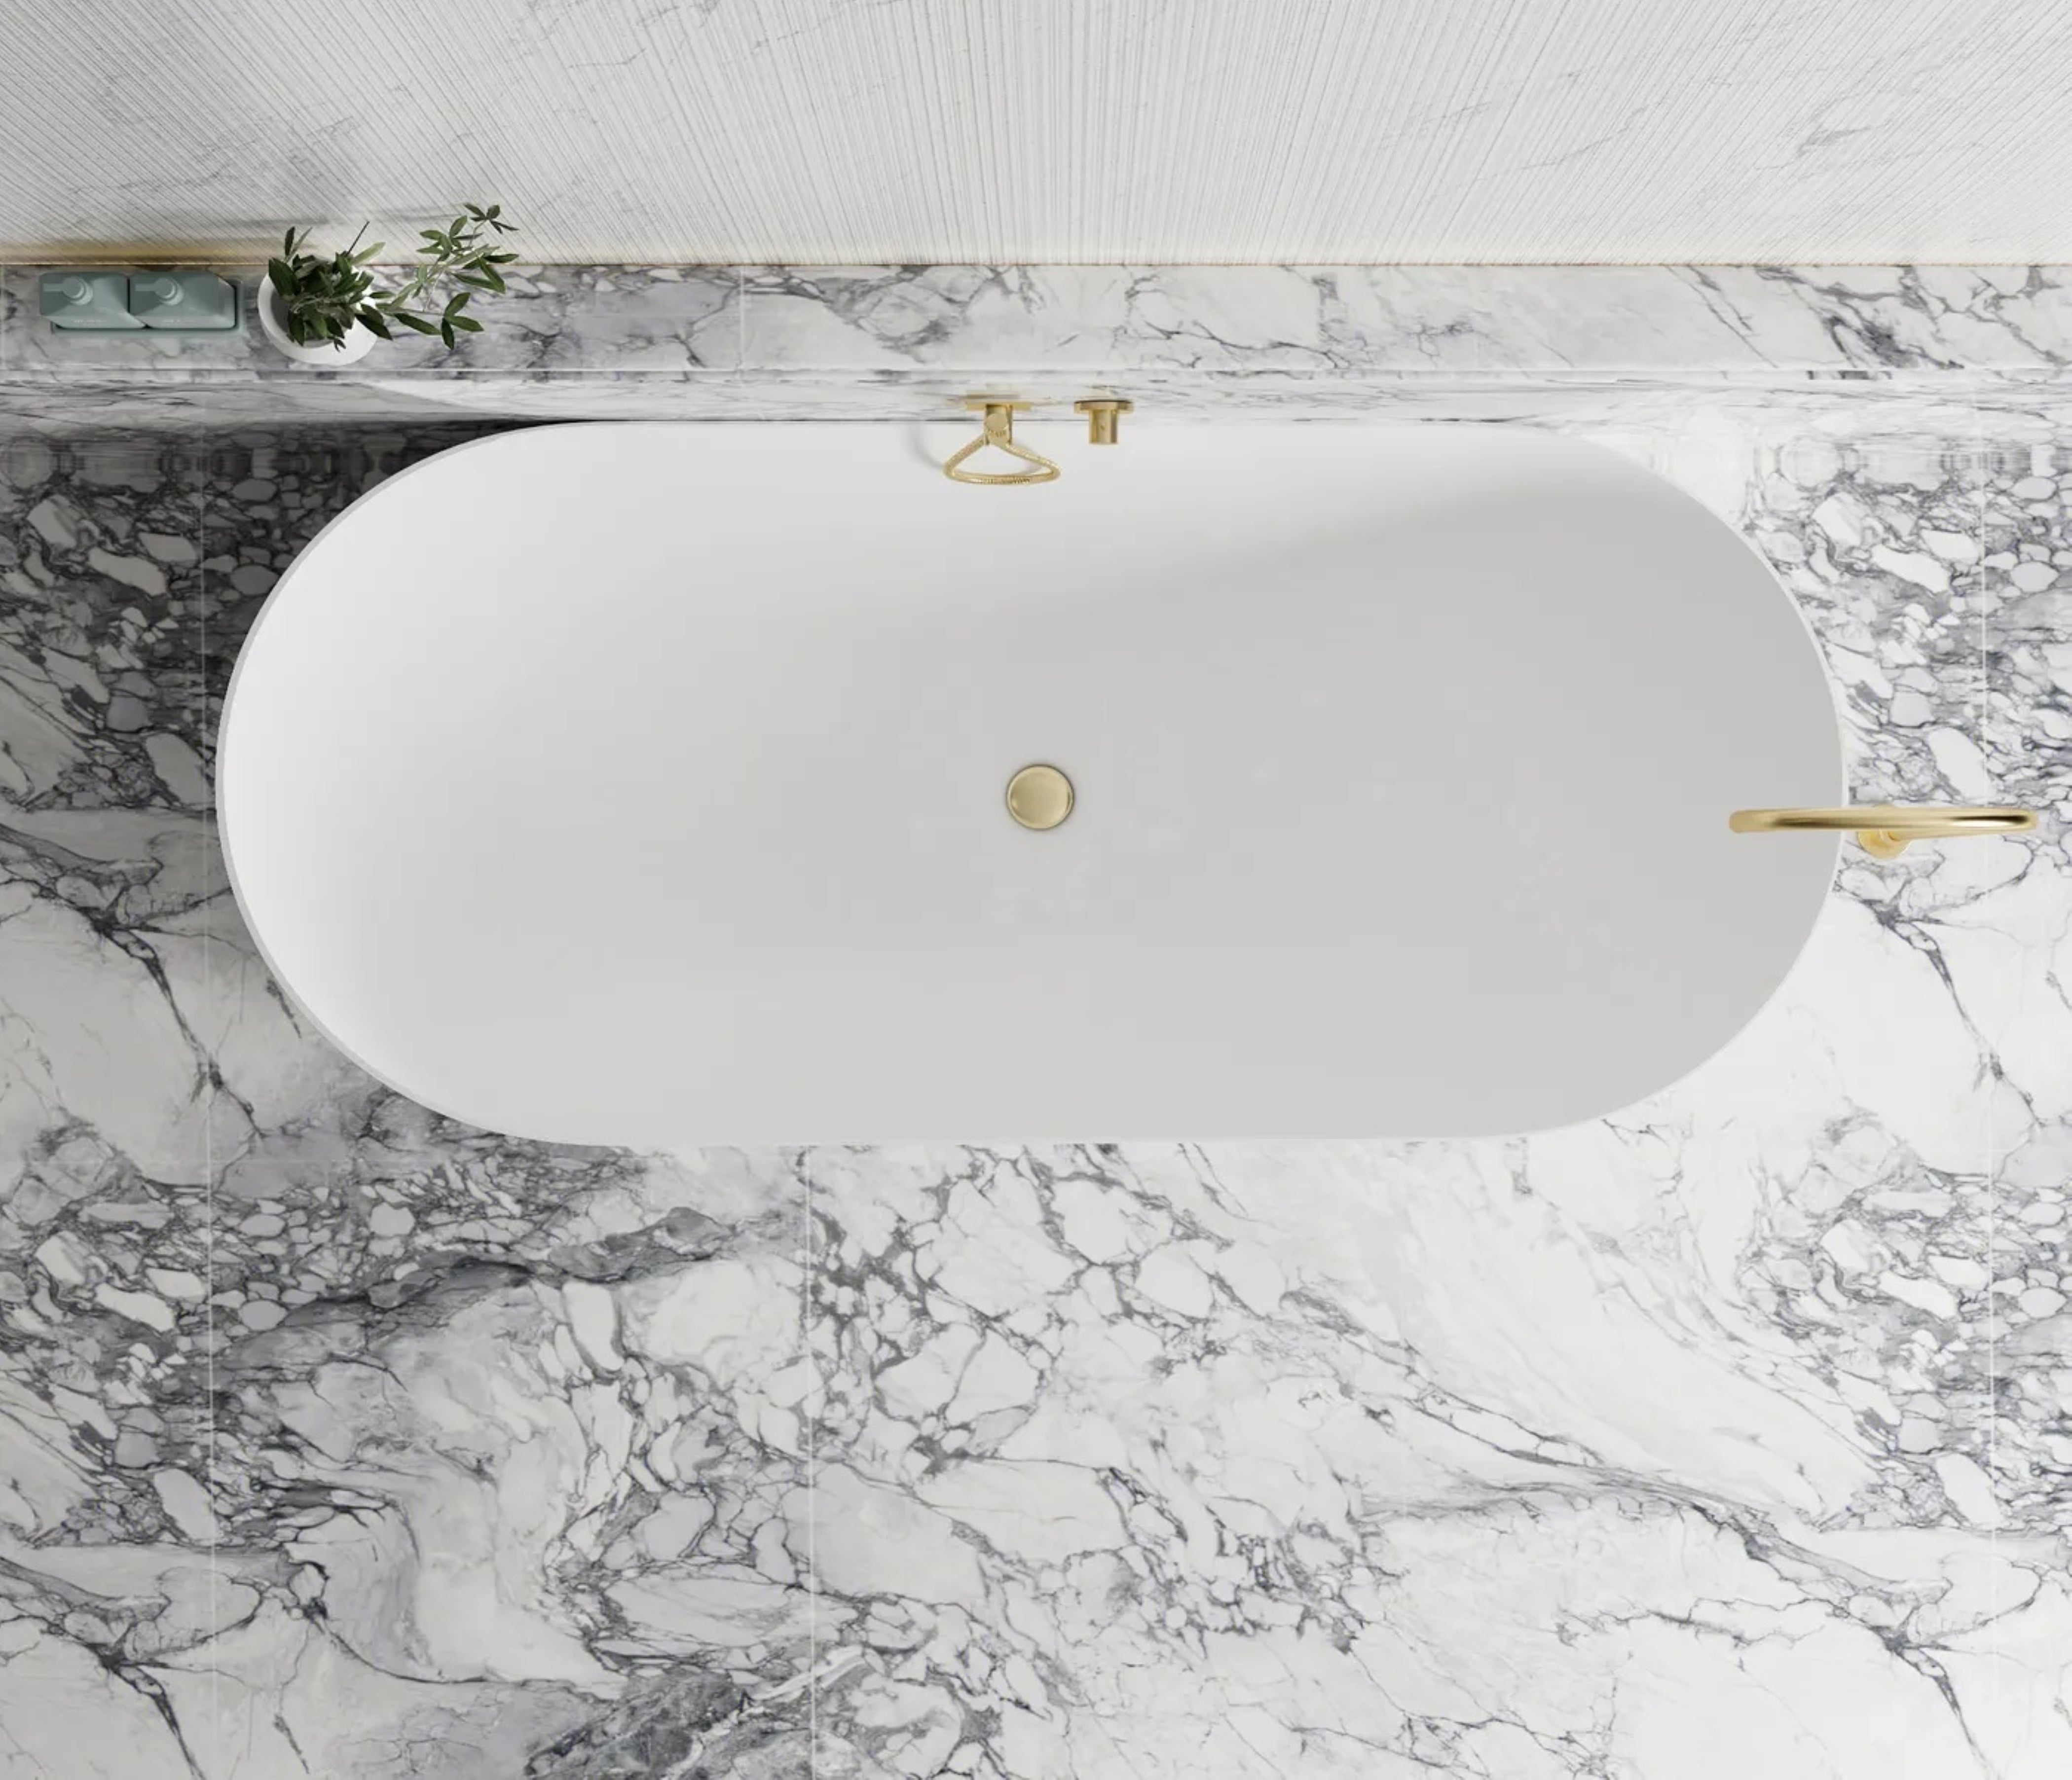 ATTICA NOOSA FREESTANDING BATH MATTE WHITE (AVAILABLE IN 1500MM AND 1700MM)